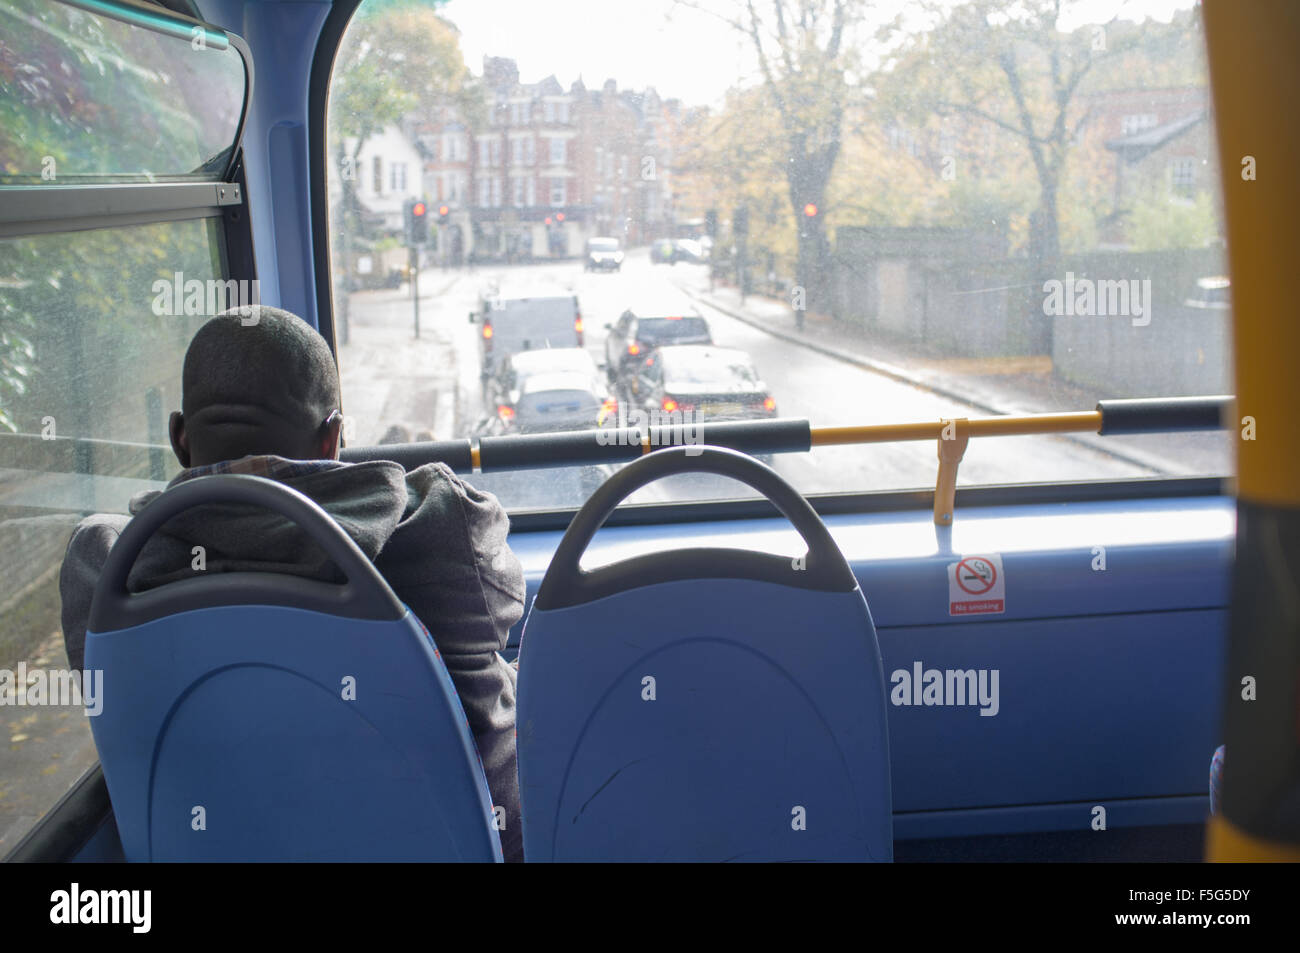 A passenger sitting on the front seat of a London bus Stock Photo